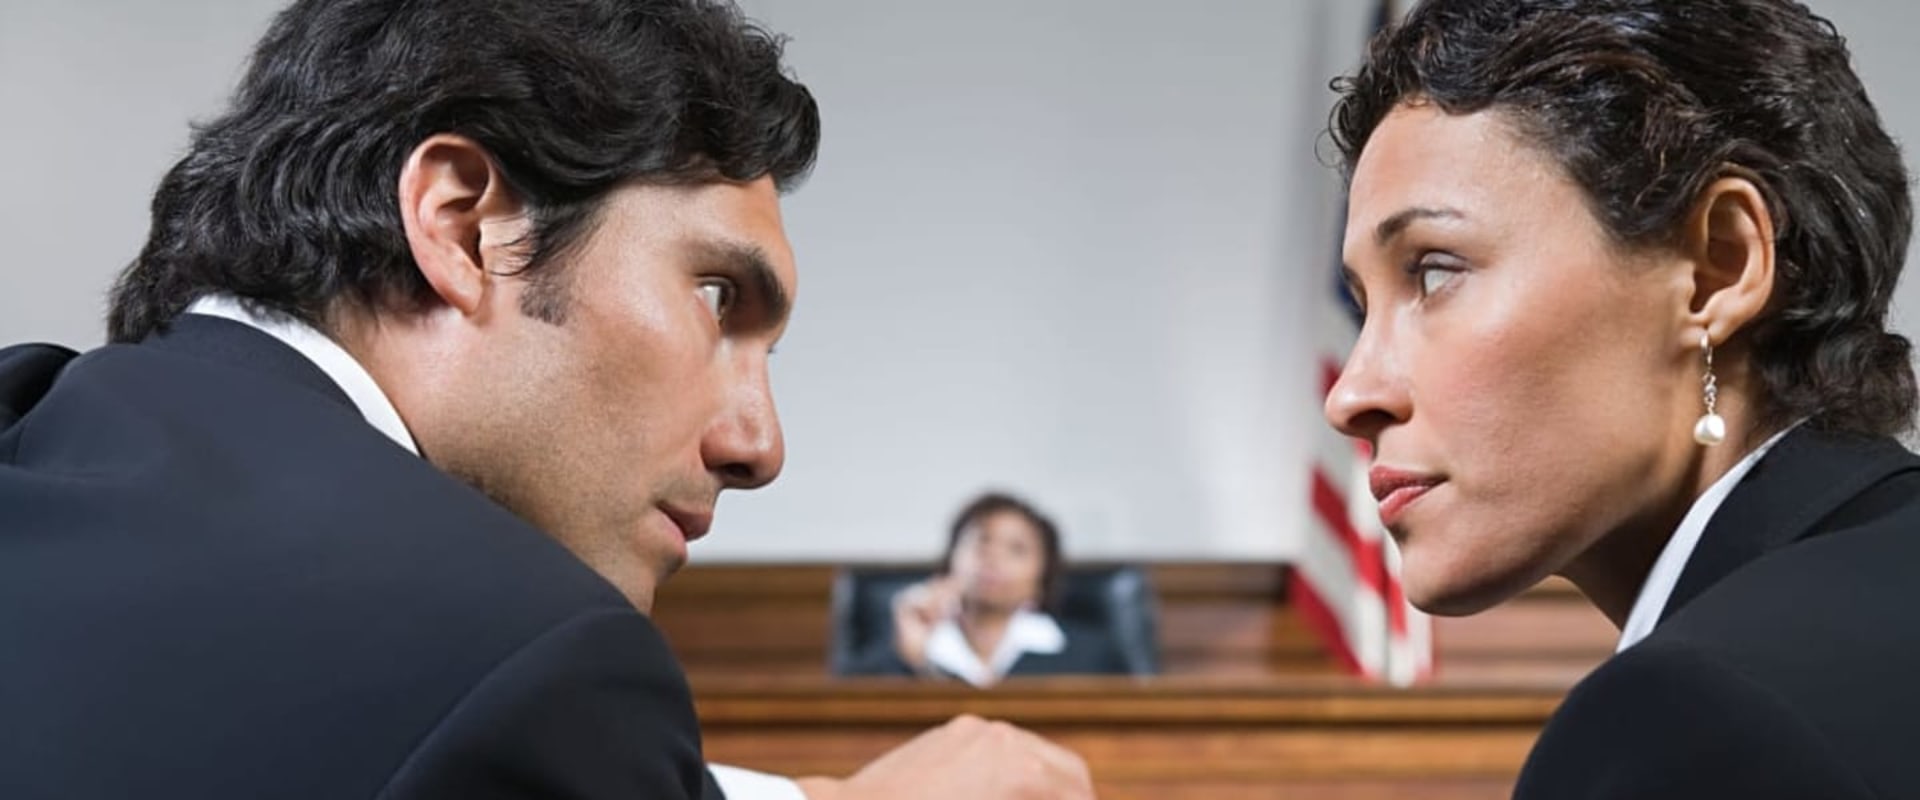 Do defense lawyers distort the truth?